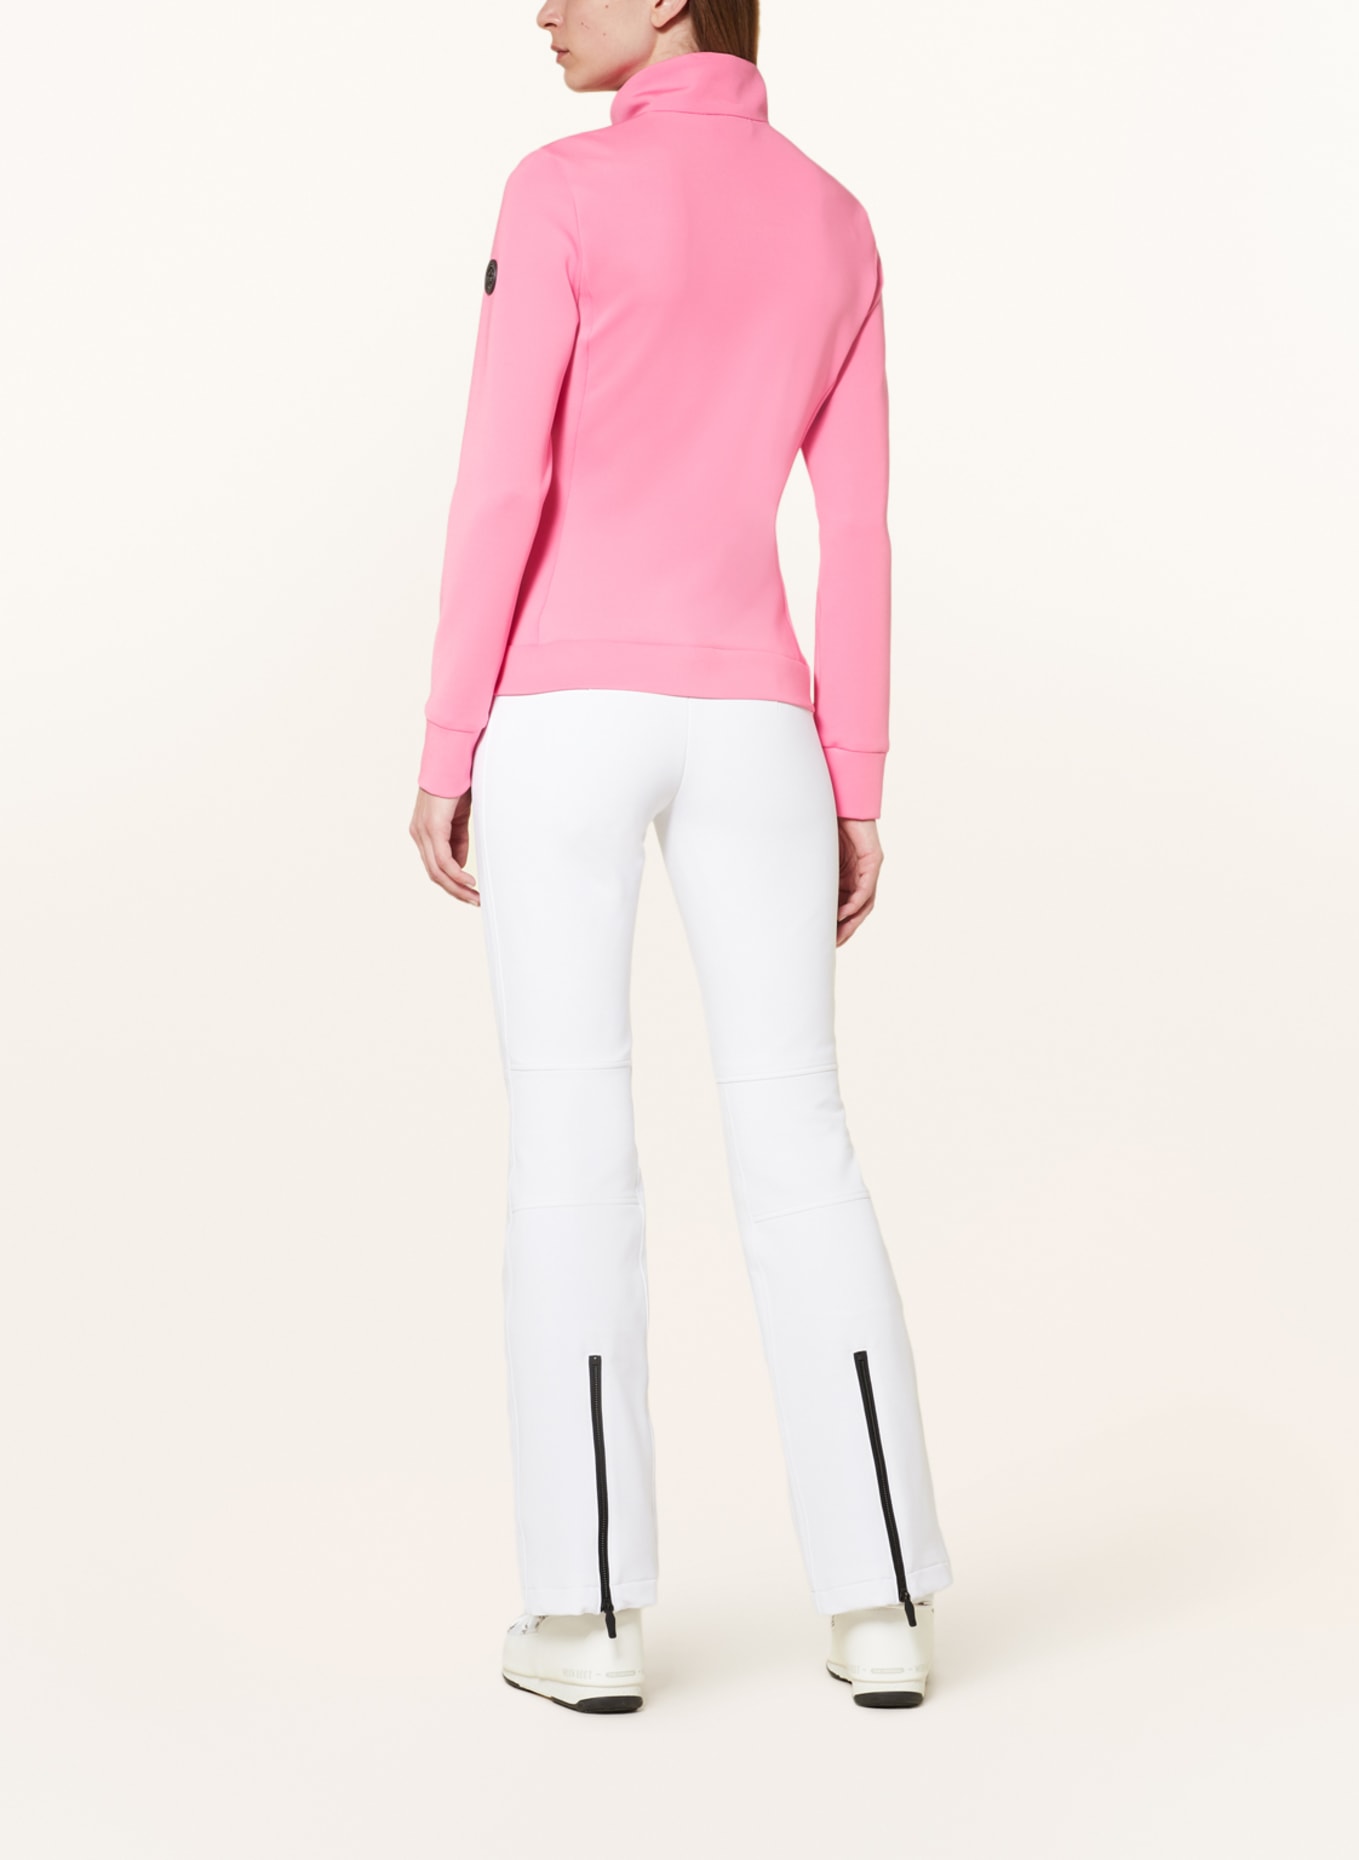 SPORTALM Mid-layer jacket, Color: PINK (Image 3)